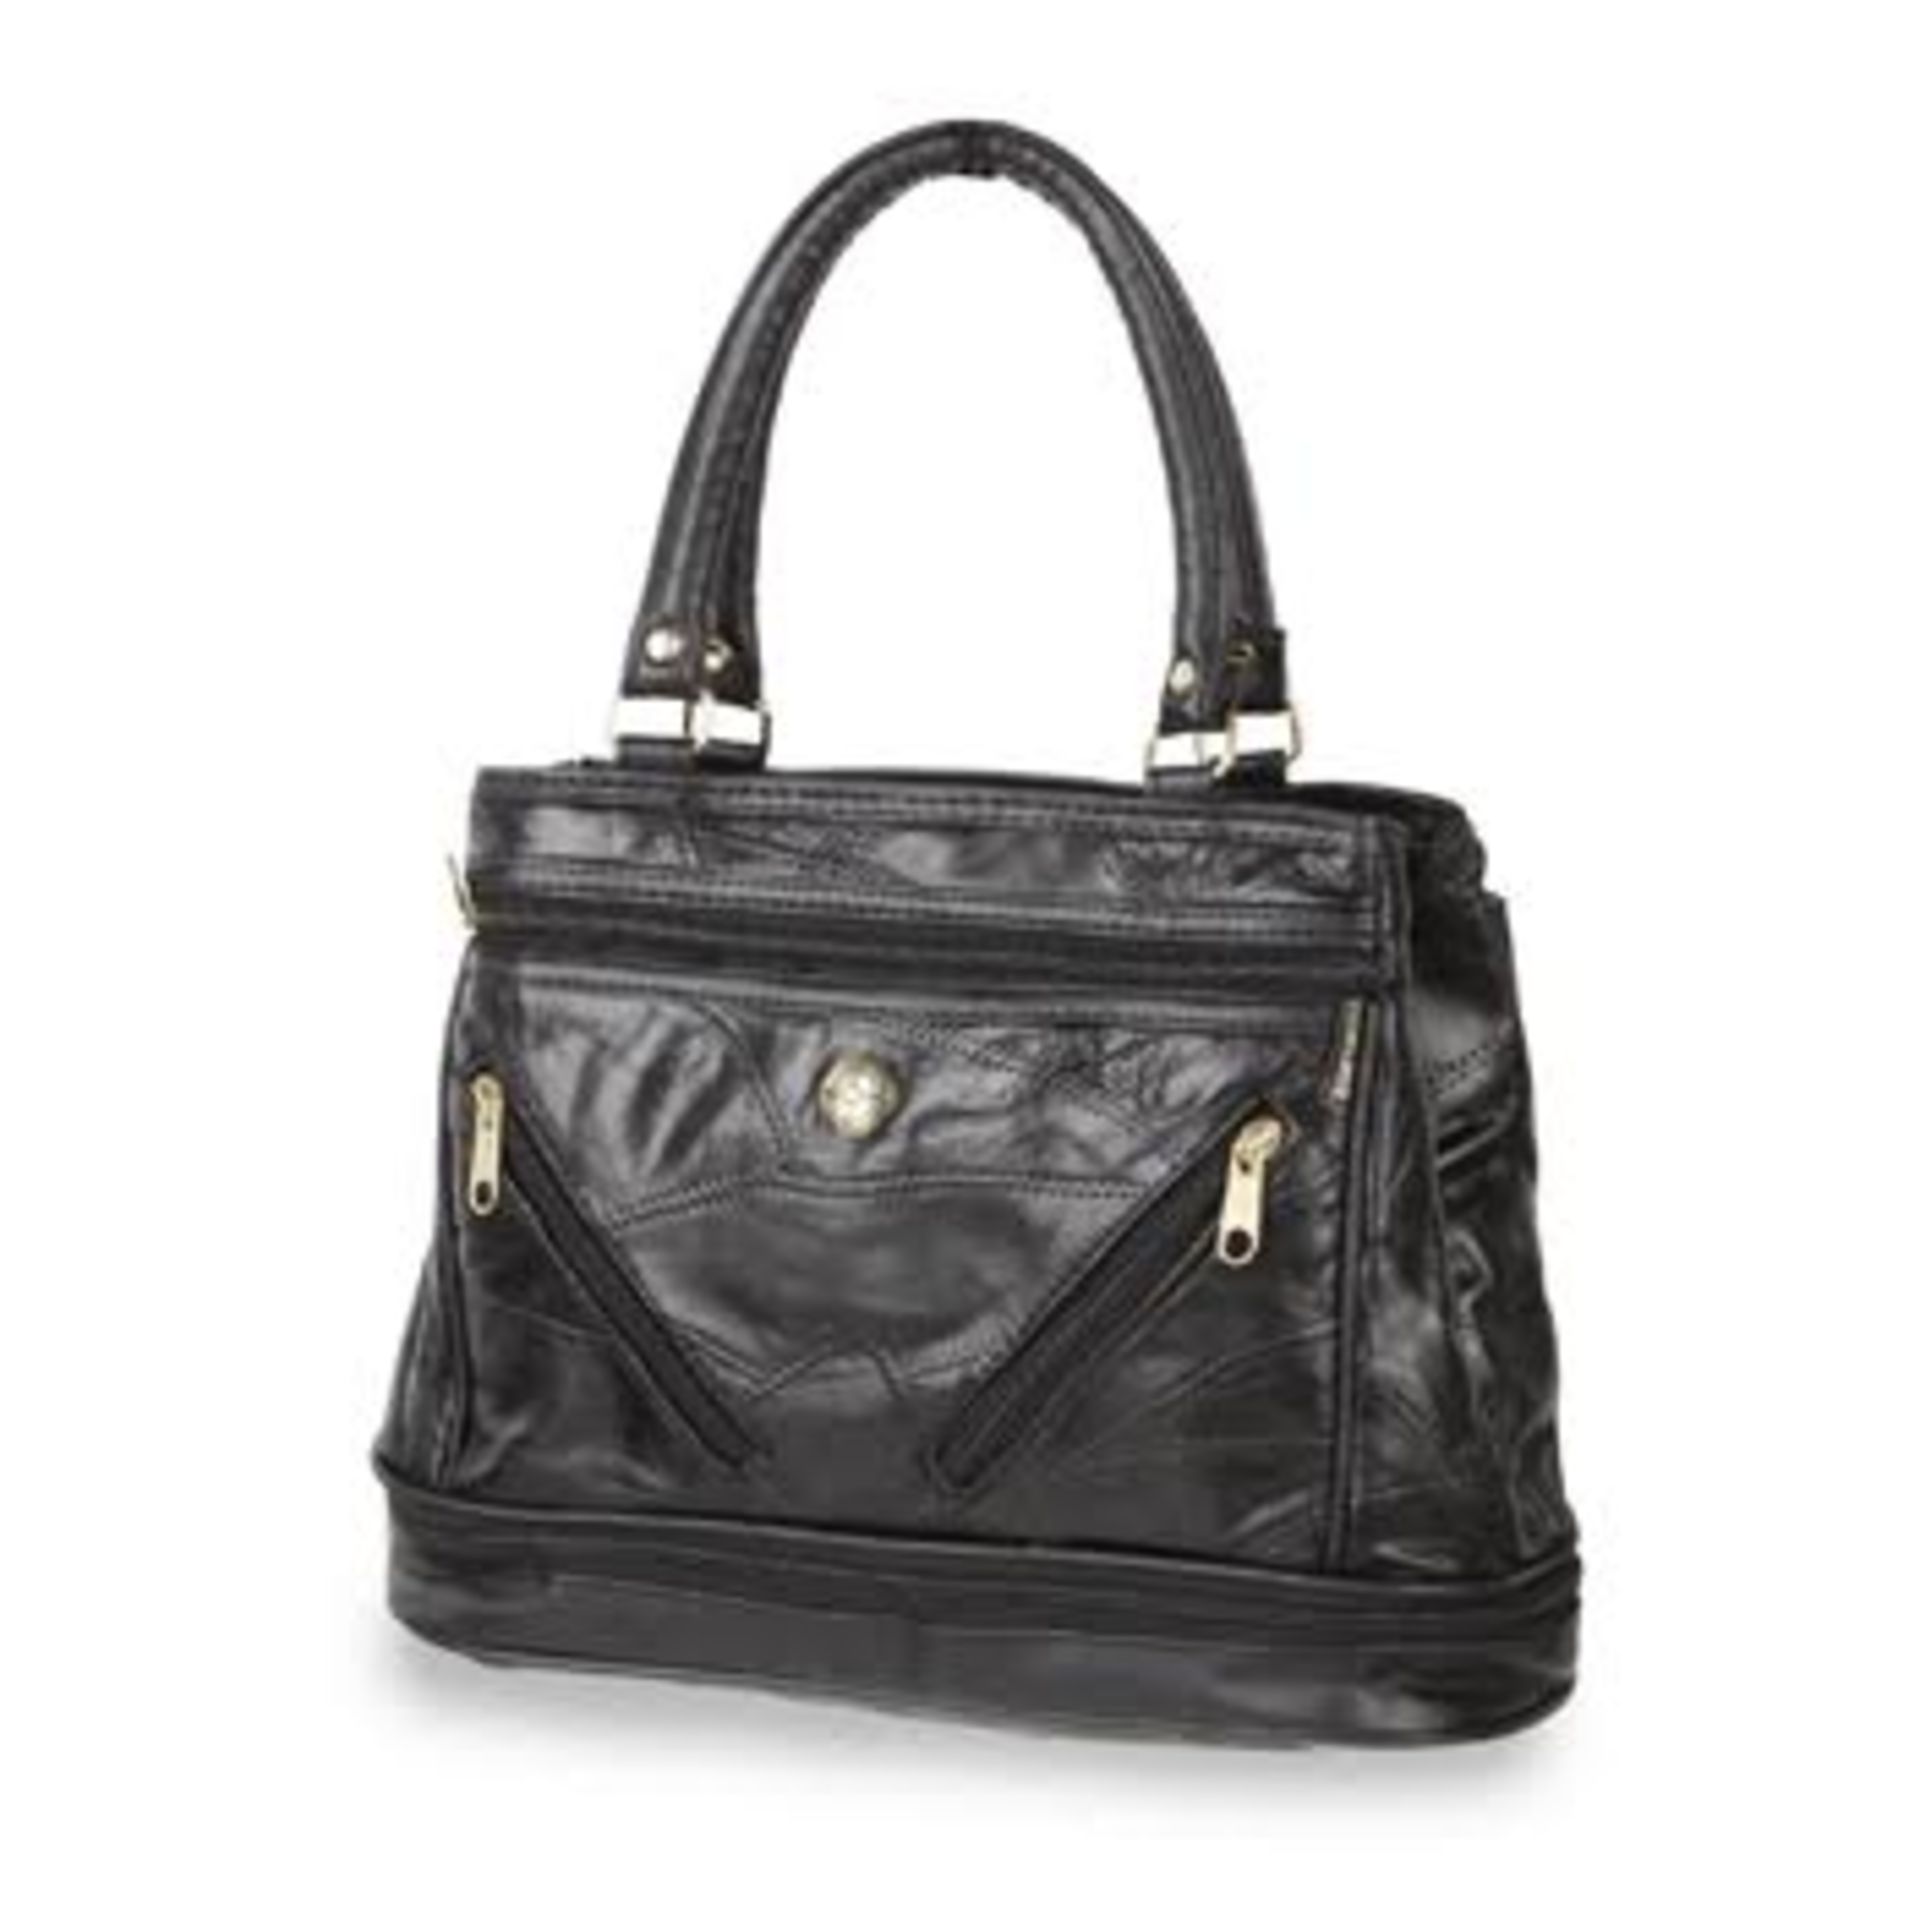 V *TRADE QTY* Brand New Leather Ladies Black Handbag X 5 YOUR BID PRICE TO BE MULTIPLIED BY FIVE